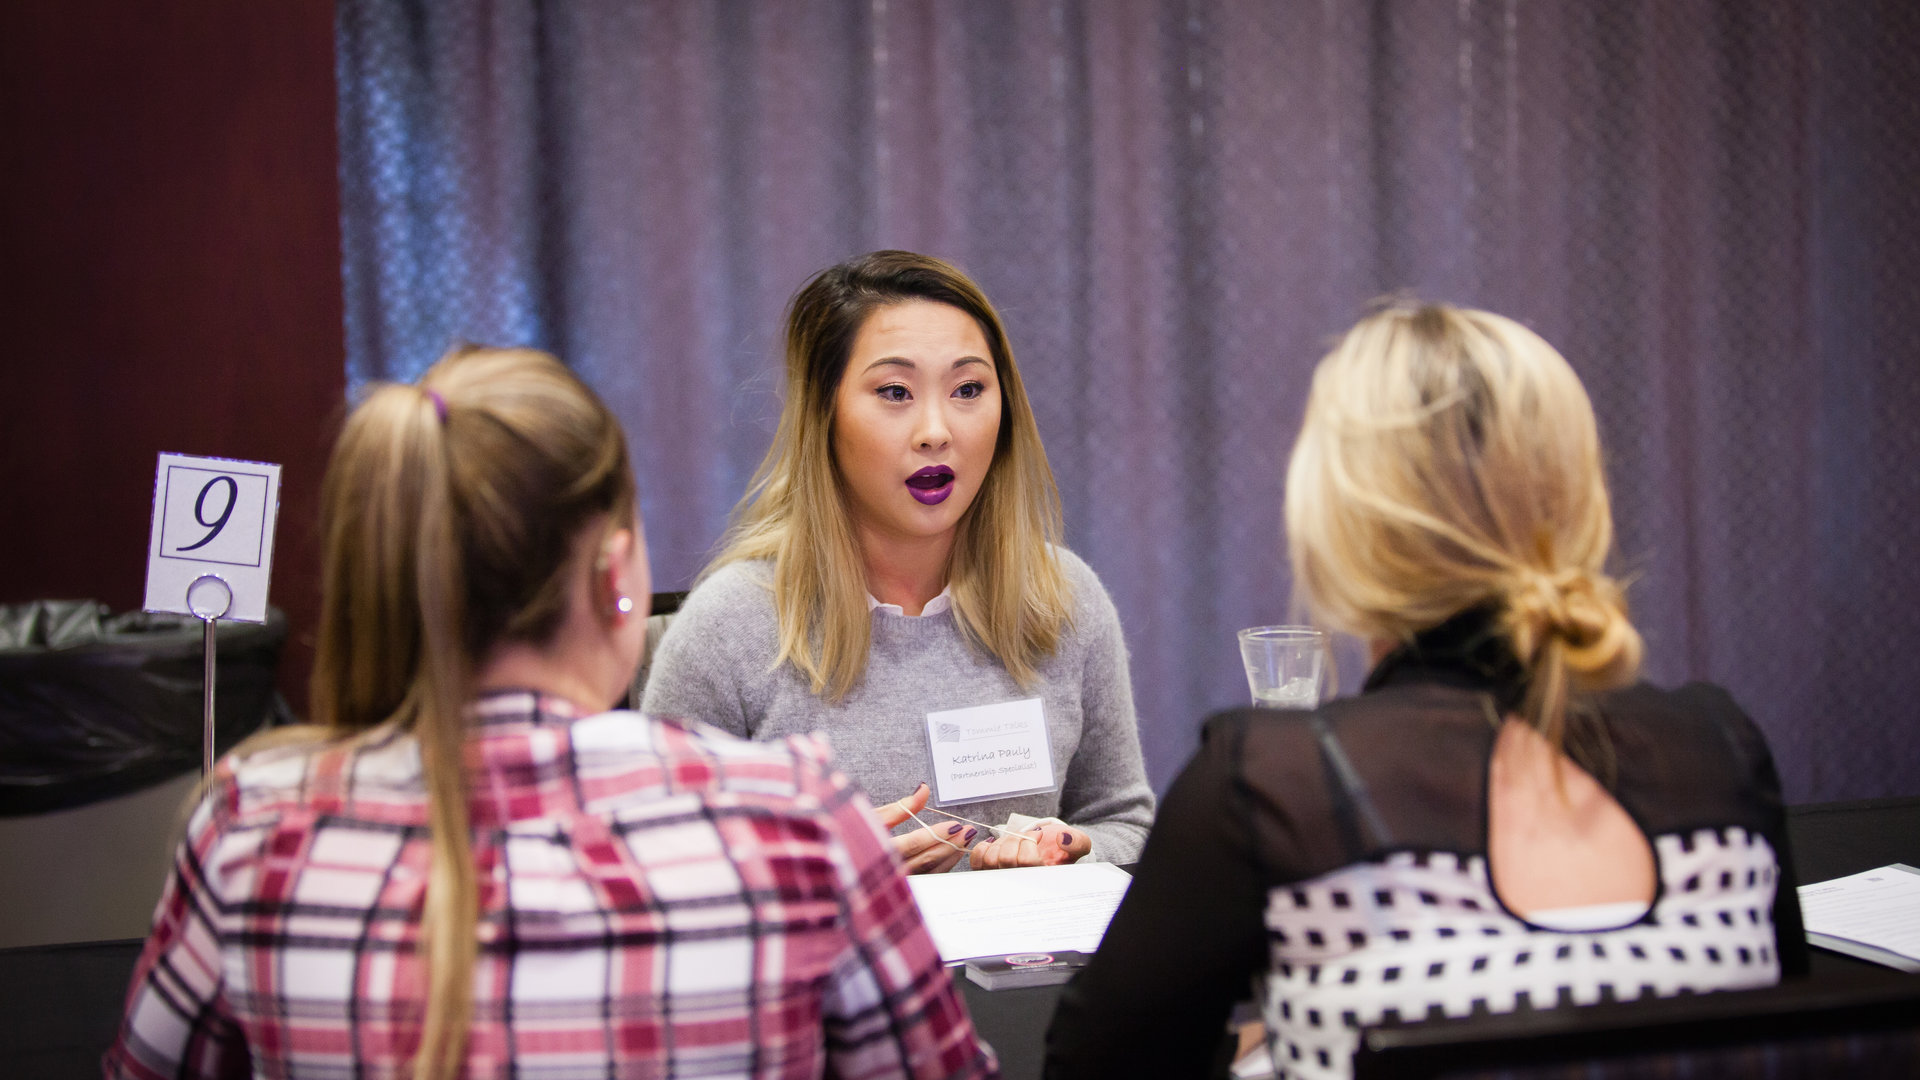 students talk to a mentor during a Speed Mentoring event